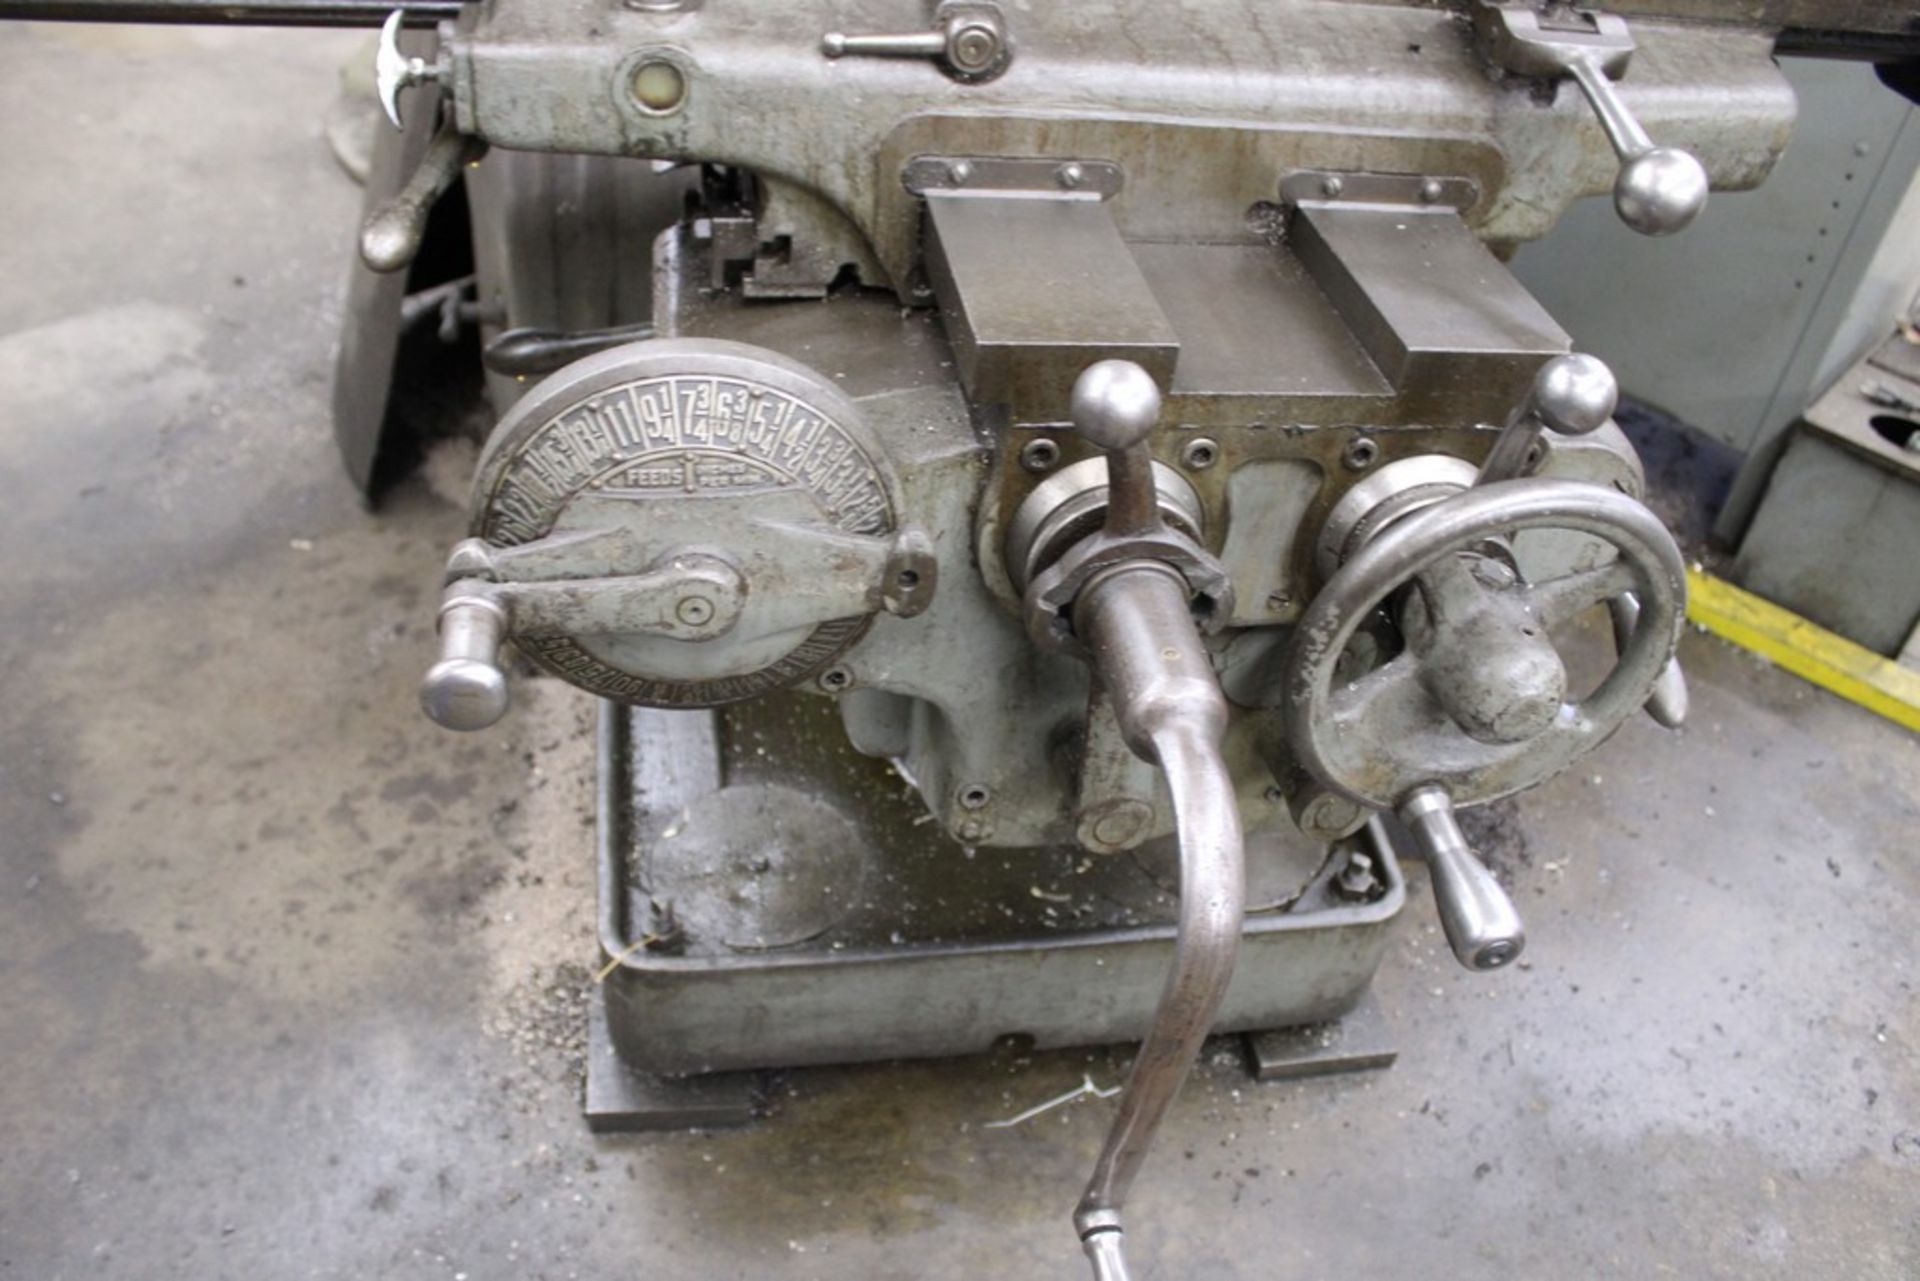 KEARNEY & TRECKER MODEL 10HP-2CK VERTICAL MILL, S/N 3-7763, 1500 RPM SPINDLE, 13-1/2’X58” TABLE - Image 3 of 8